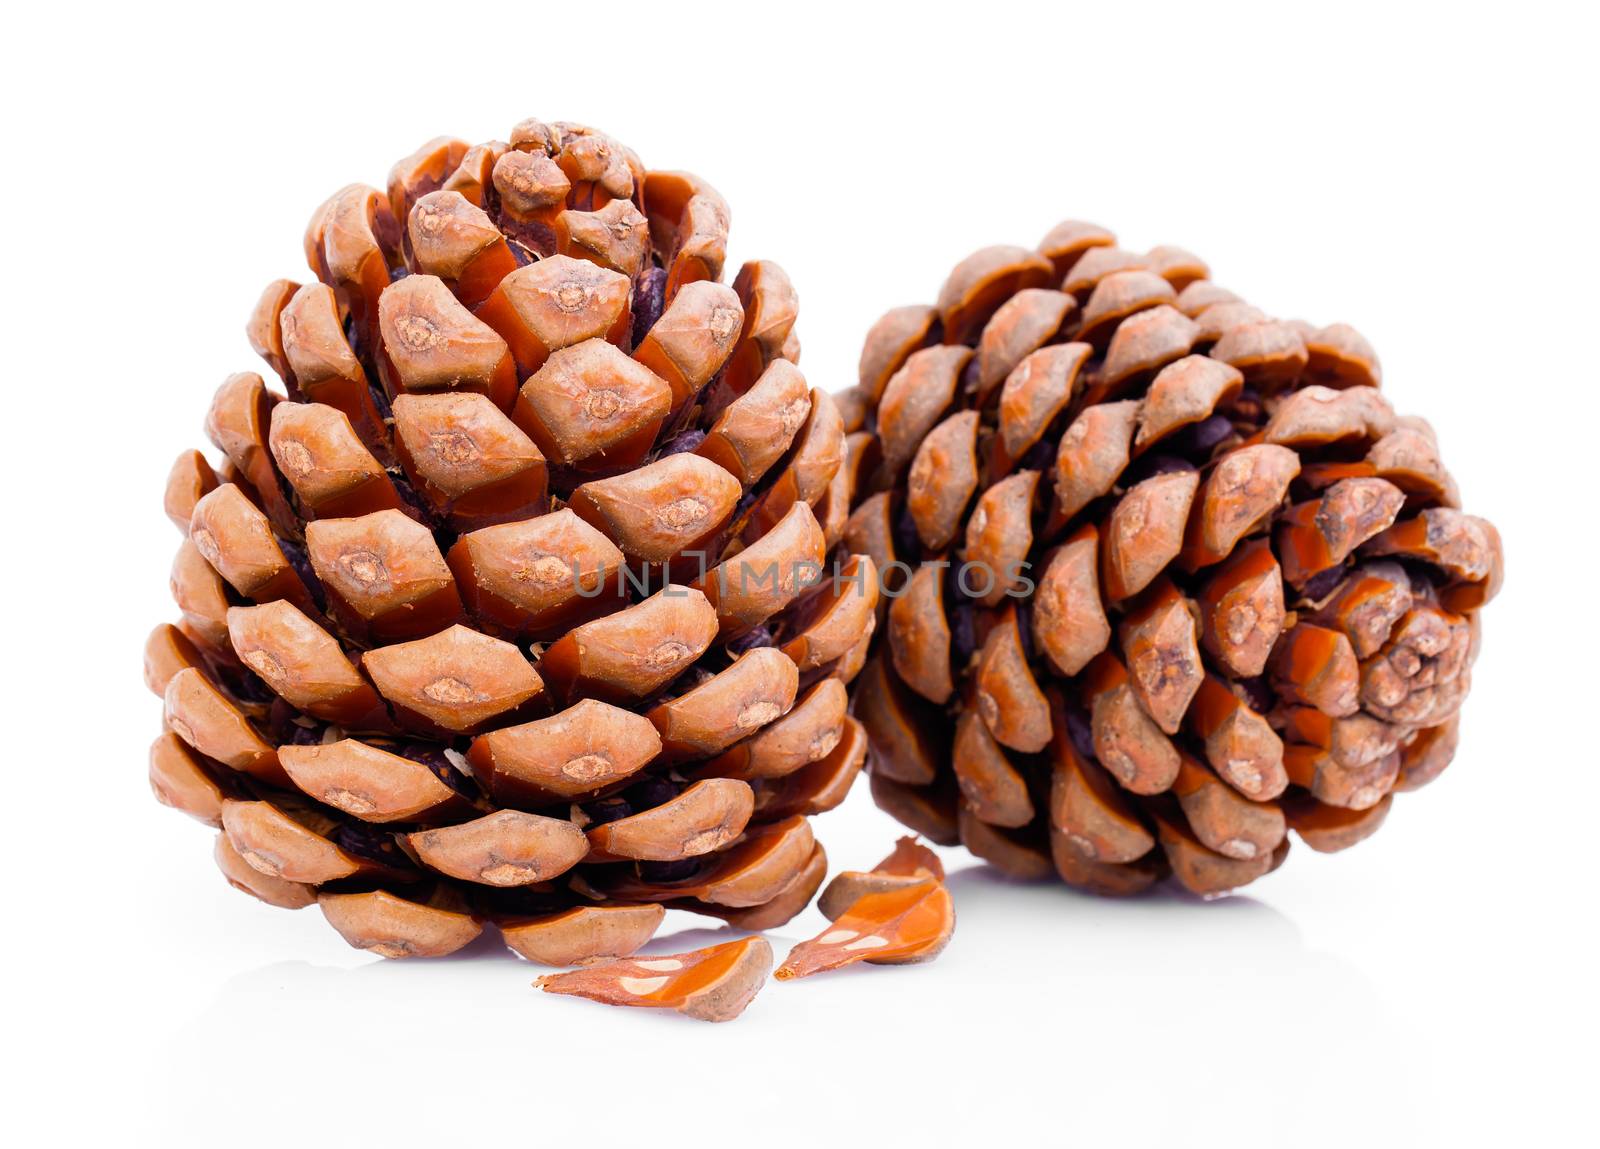 cedar pine cones with nuts isolated on white background by motorolka